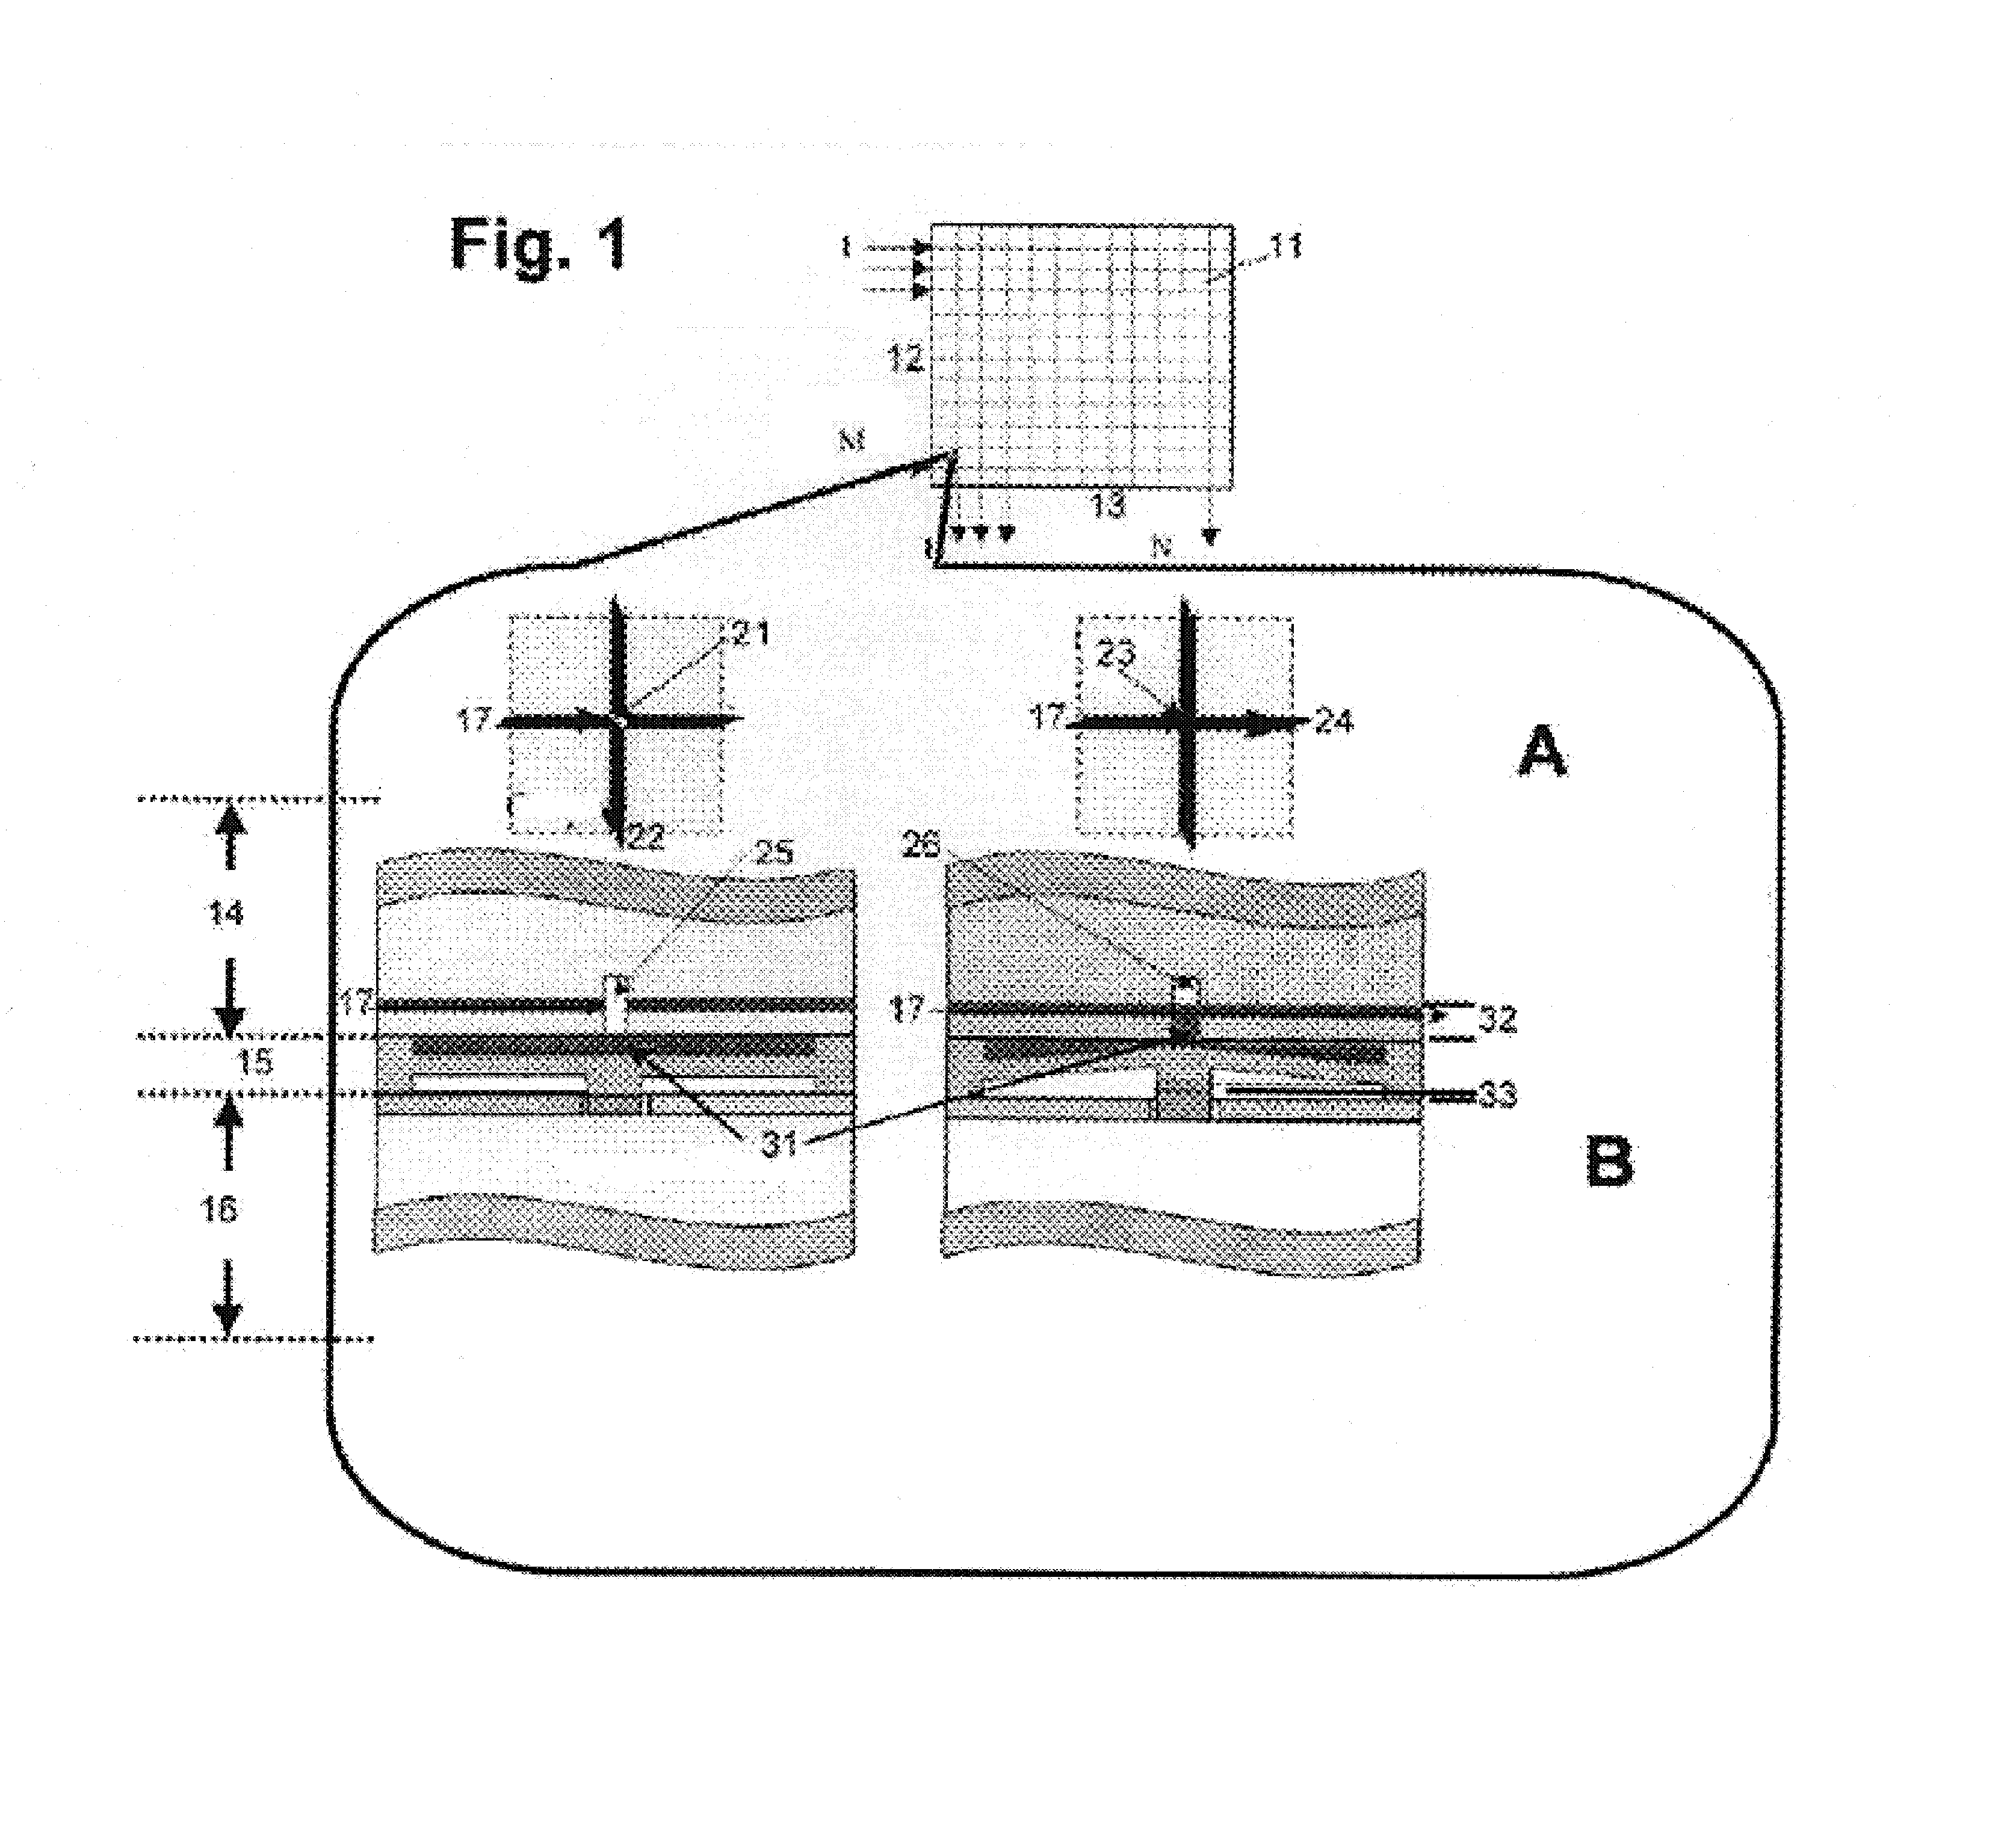 Reciprocating microfluidic pump system for chemical or biological agents